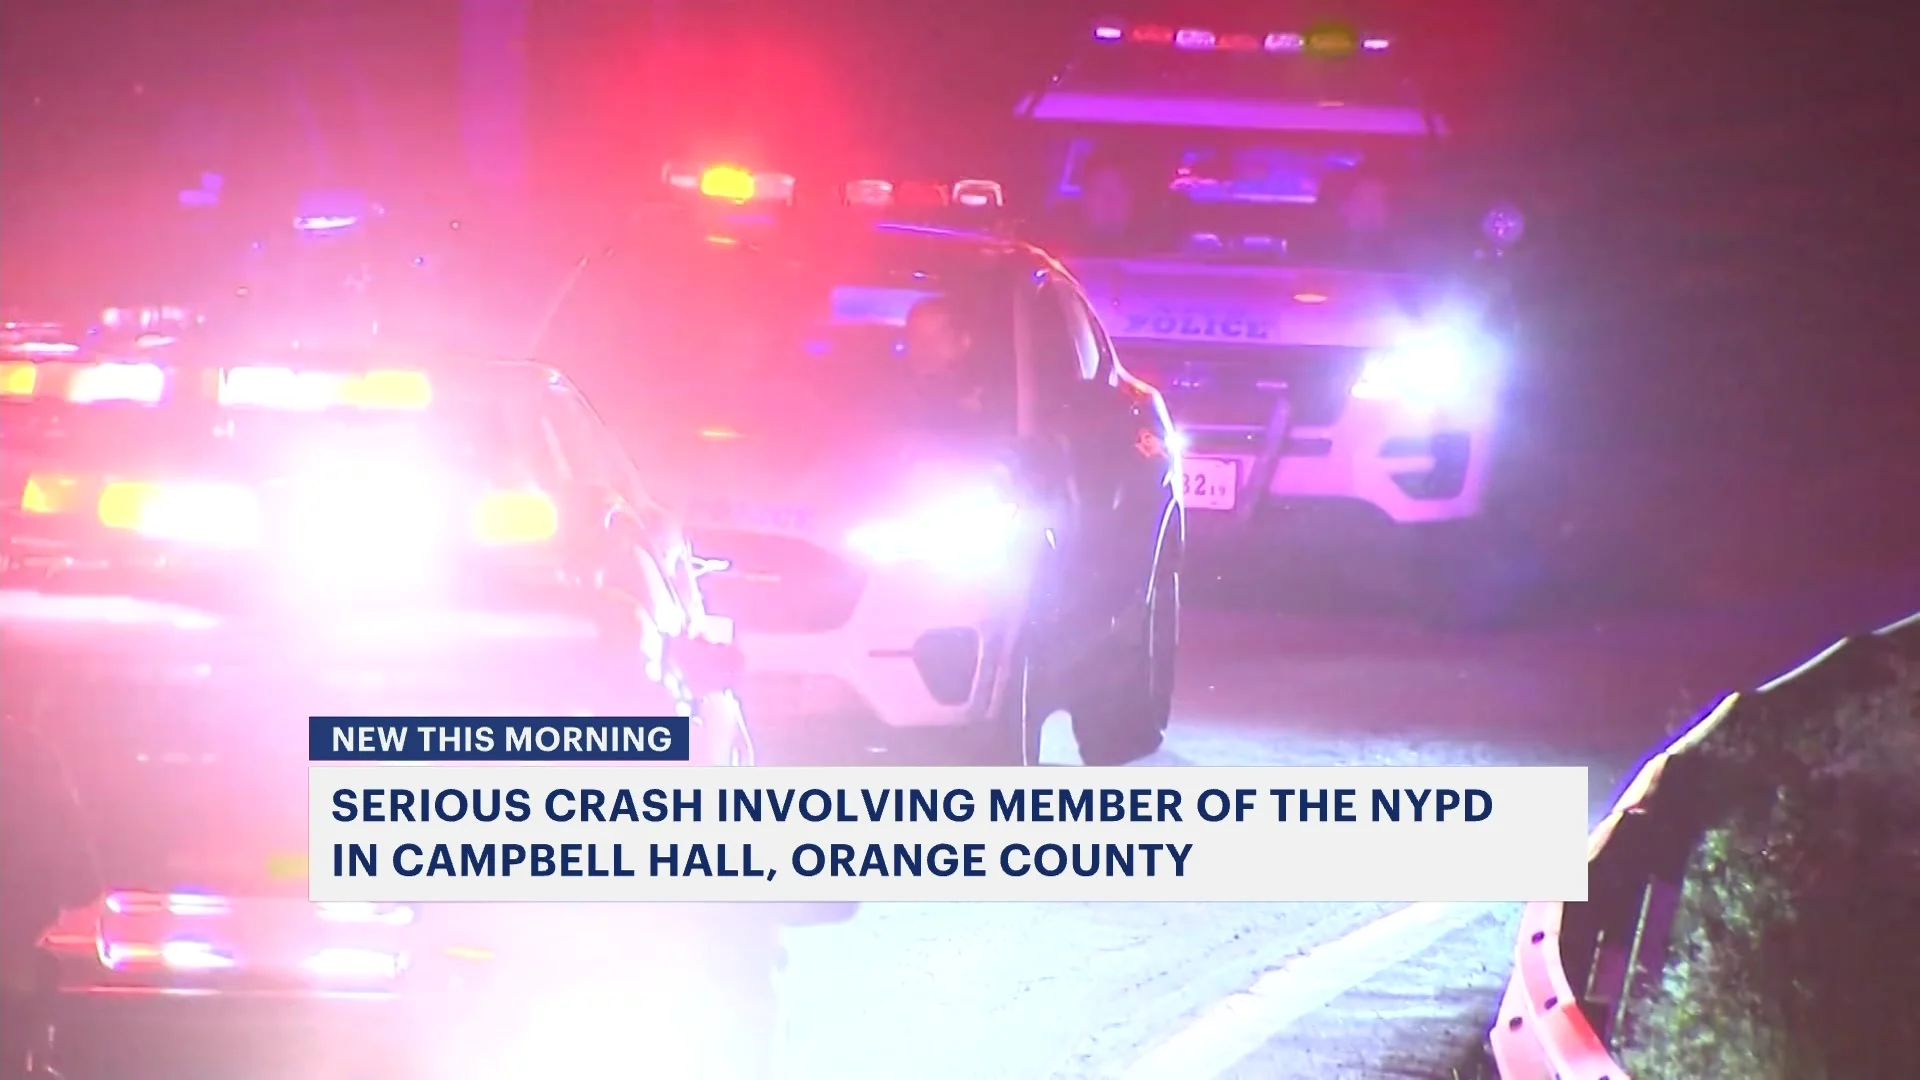 Police: Serious crash involving member of NYPD reported in Campbell Hall